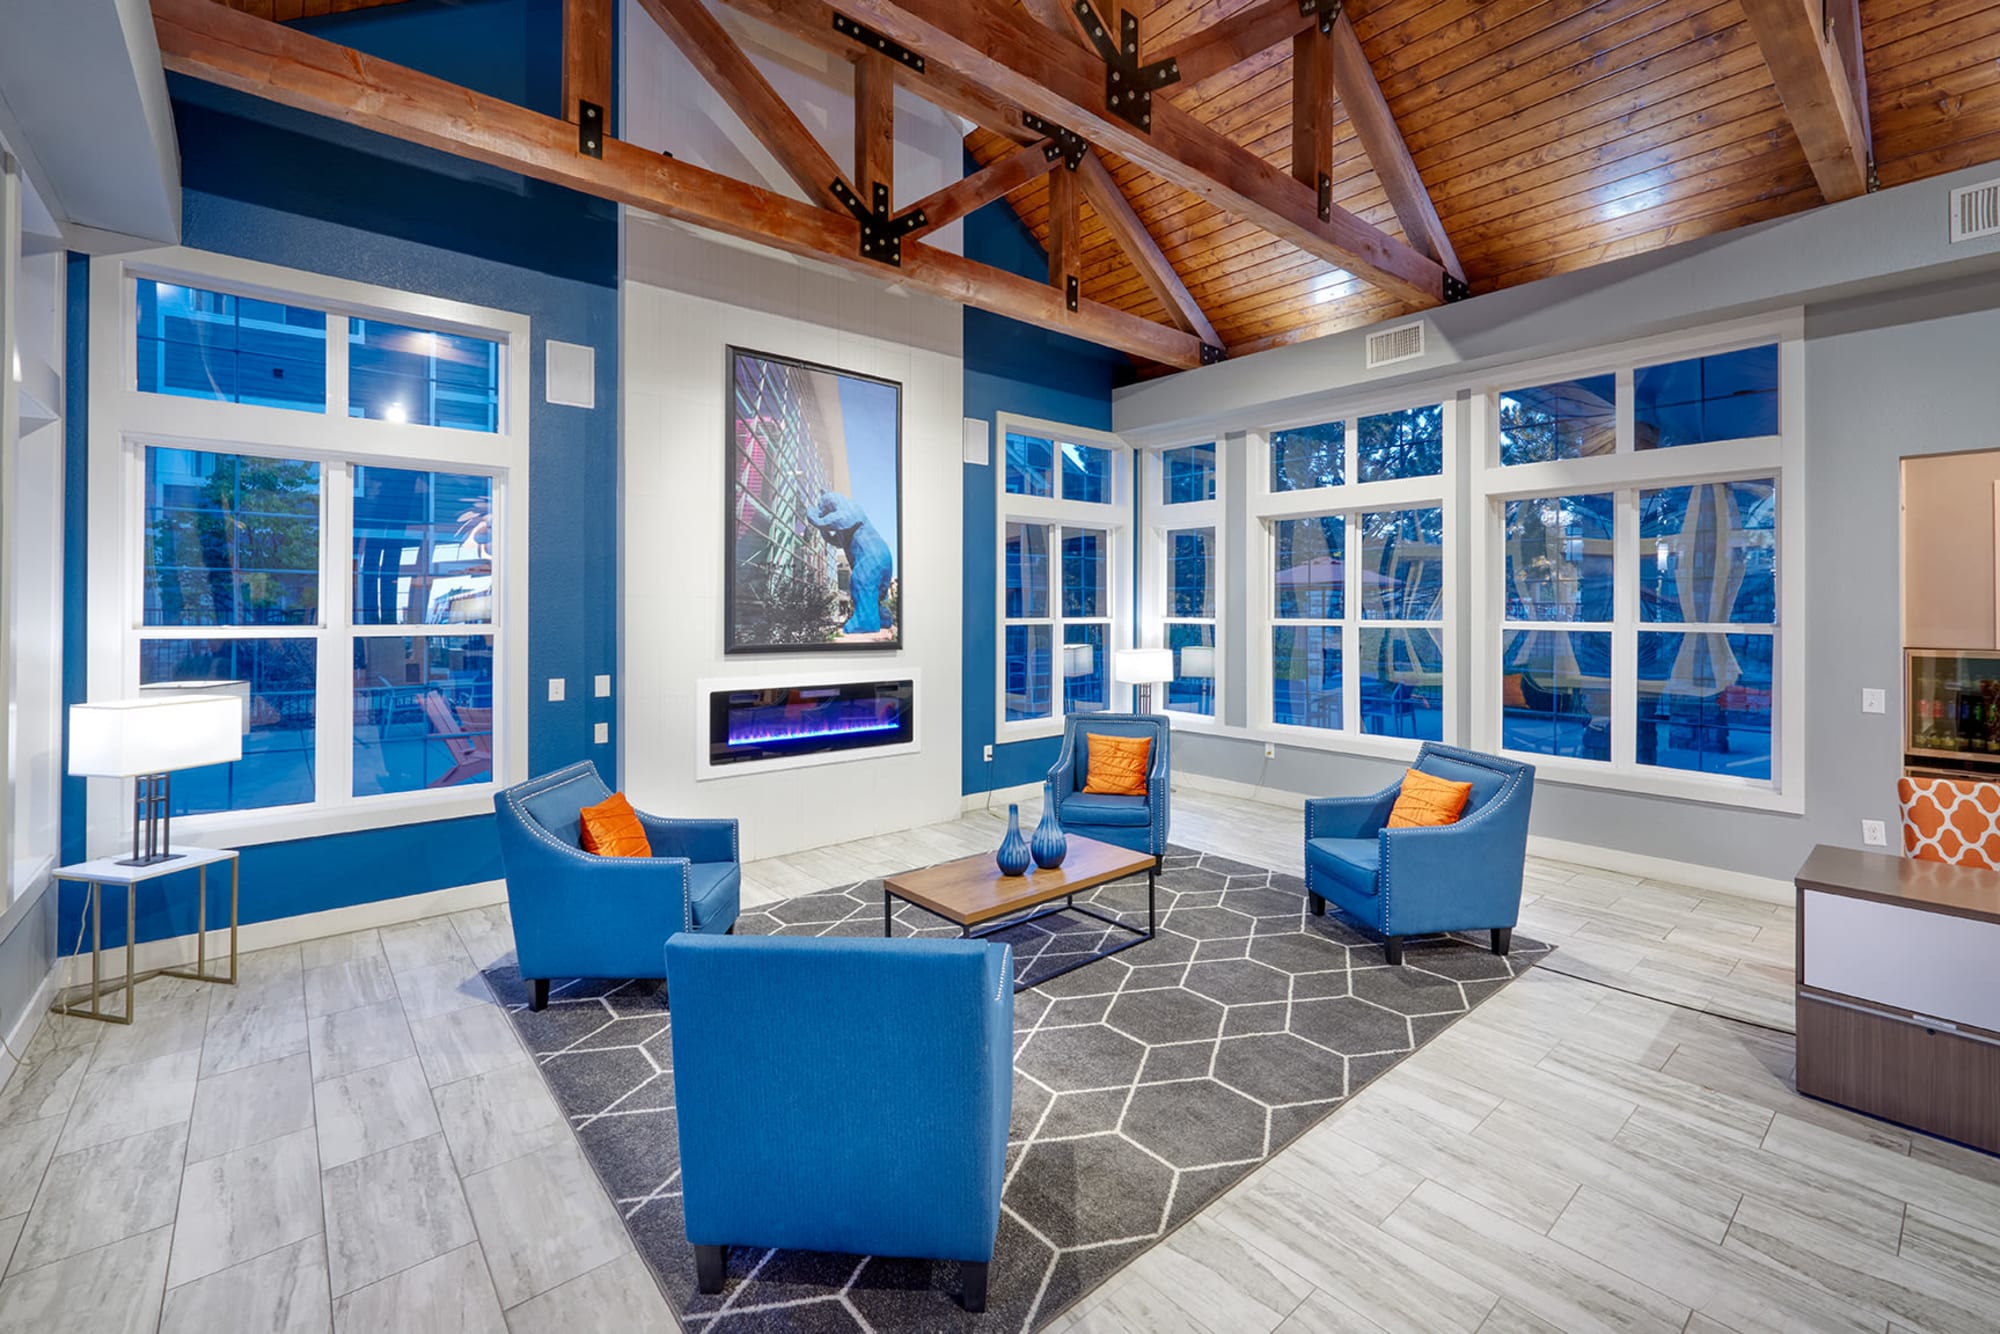 Clubhouse Seating Next to a Fireplace at Crestone Apartments in Aurora, Colorado